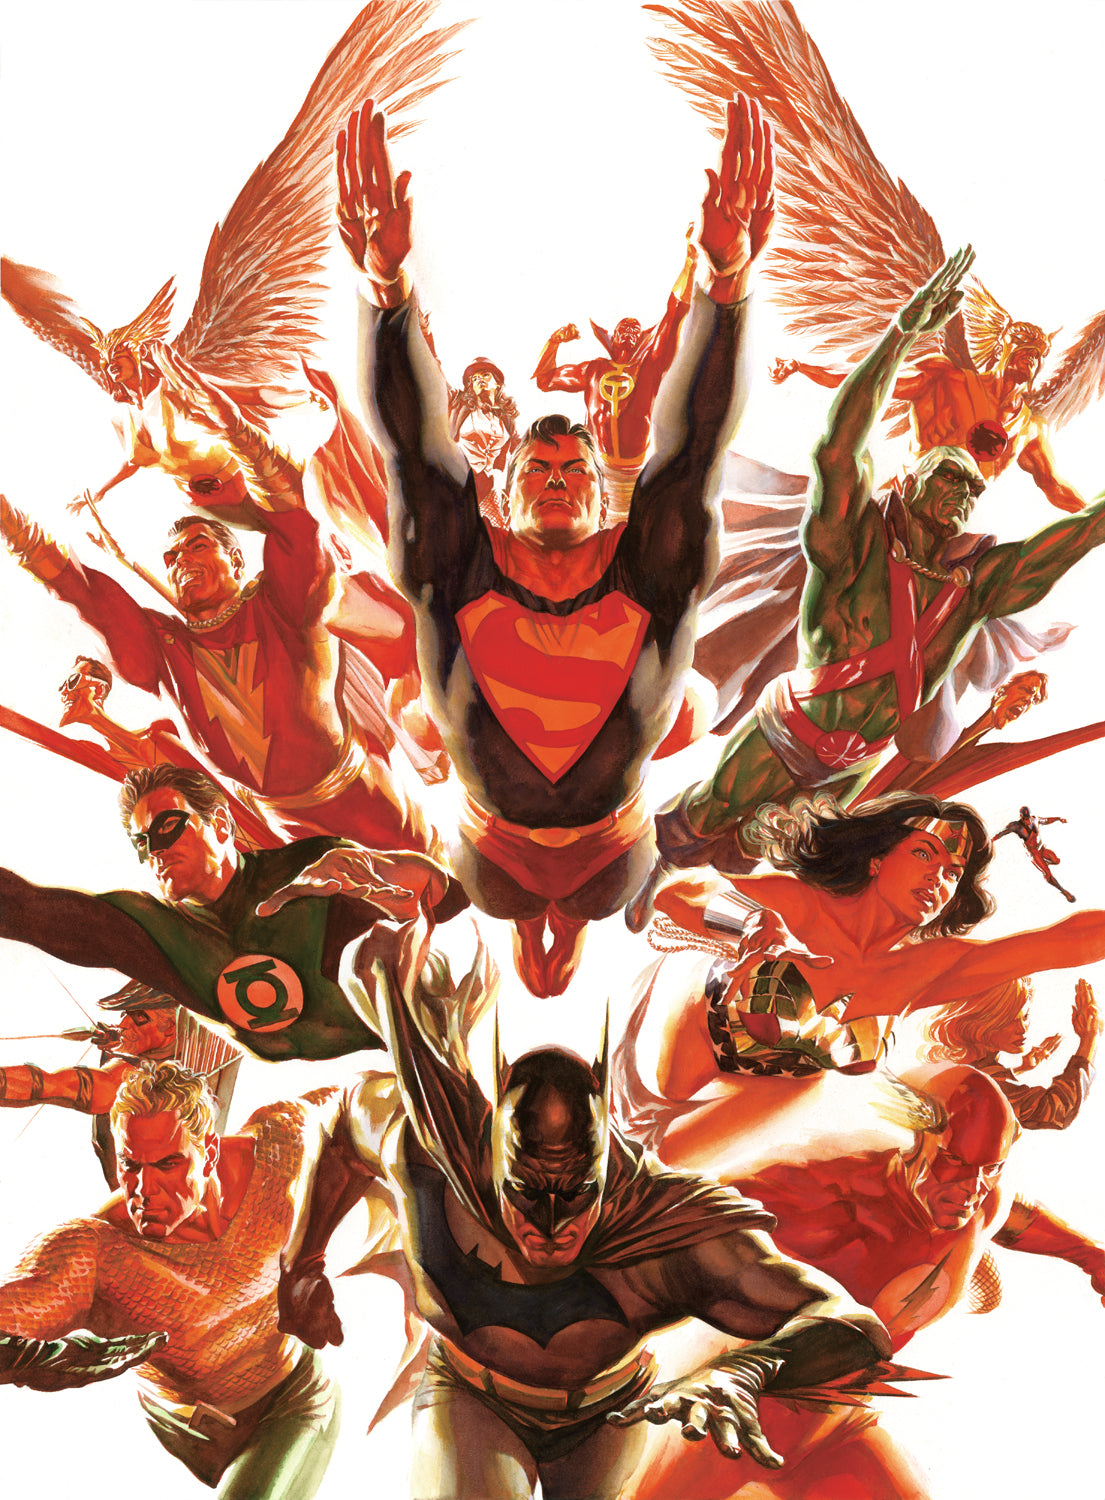 Alex Ross SIGNED World's Greatest Super-Heroes Giclee on Canvas Limited Edition